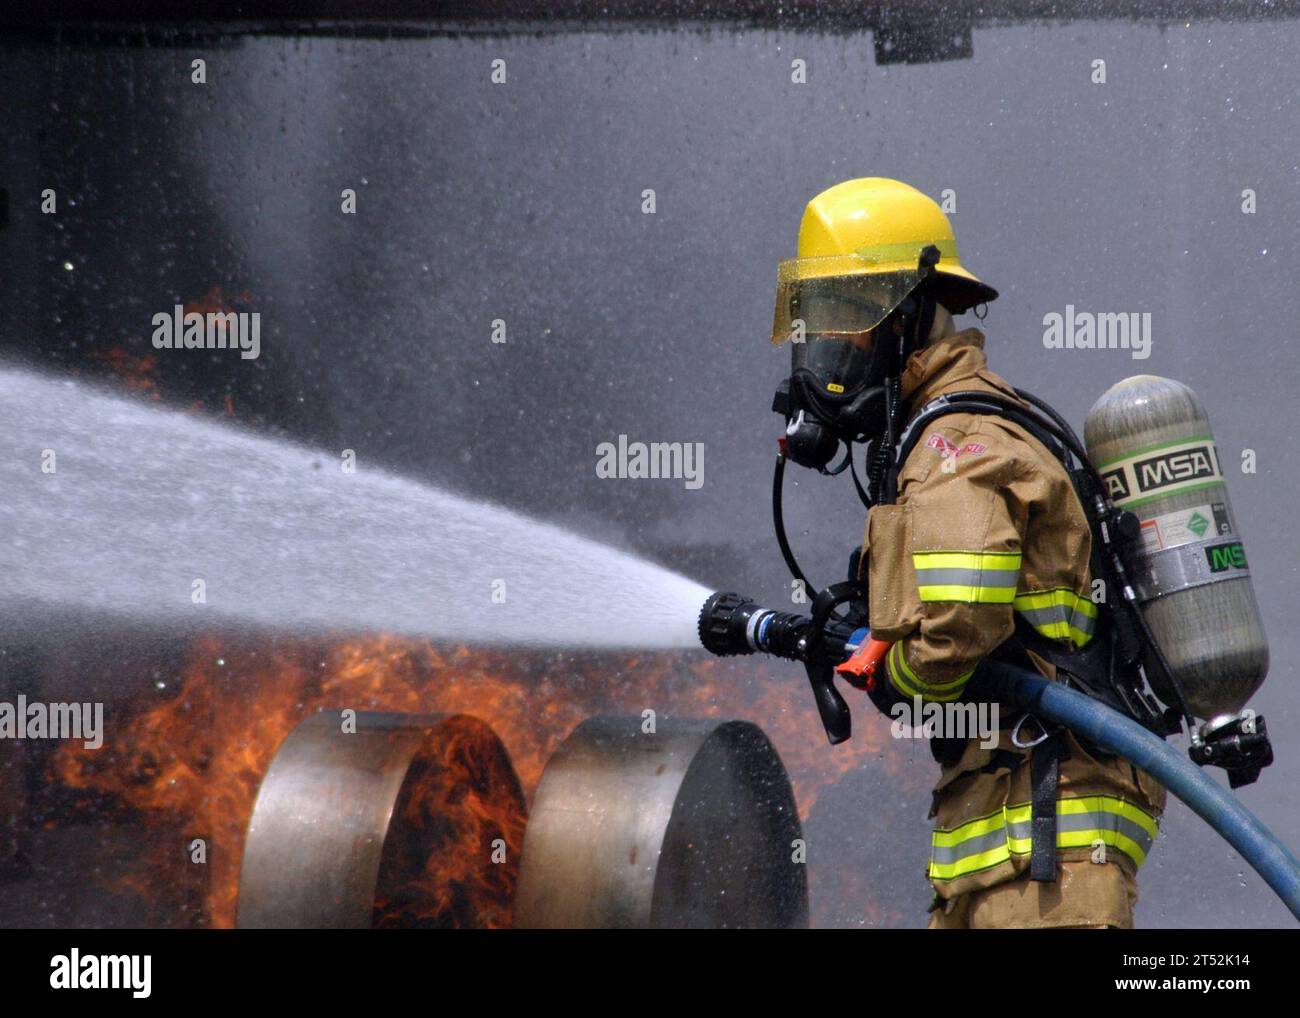 0807305277R-003  ATSUGI, Japan (July 30, 2008) A Commander, Naval Forces Japan firefighter douses a fire on a dummy aircraft during the annual off-station mishap drill at Naval Support Facility Kamiseya. Emergency response and rescue teams were tasked with putting out a simulated fire, and rescuing two personnel from a plane crash scene. U.S. Navy Stock Photo